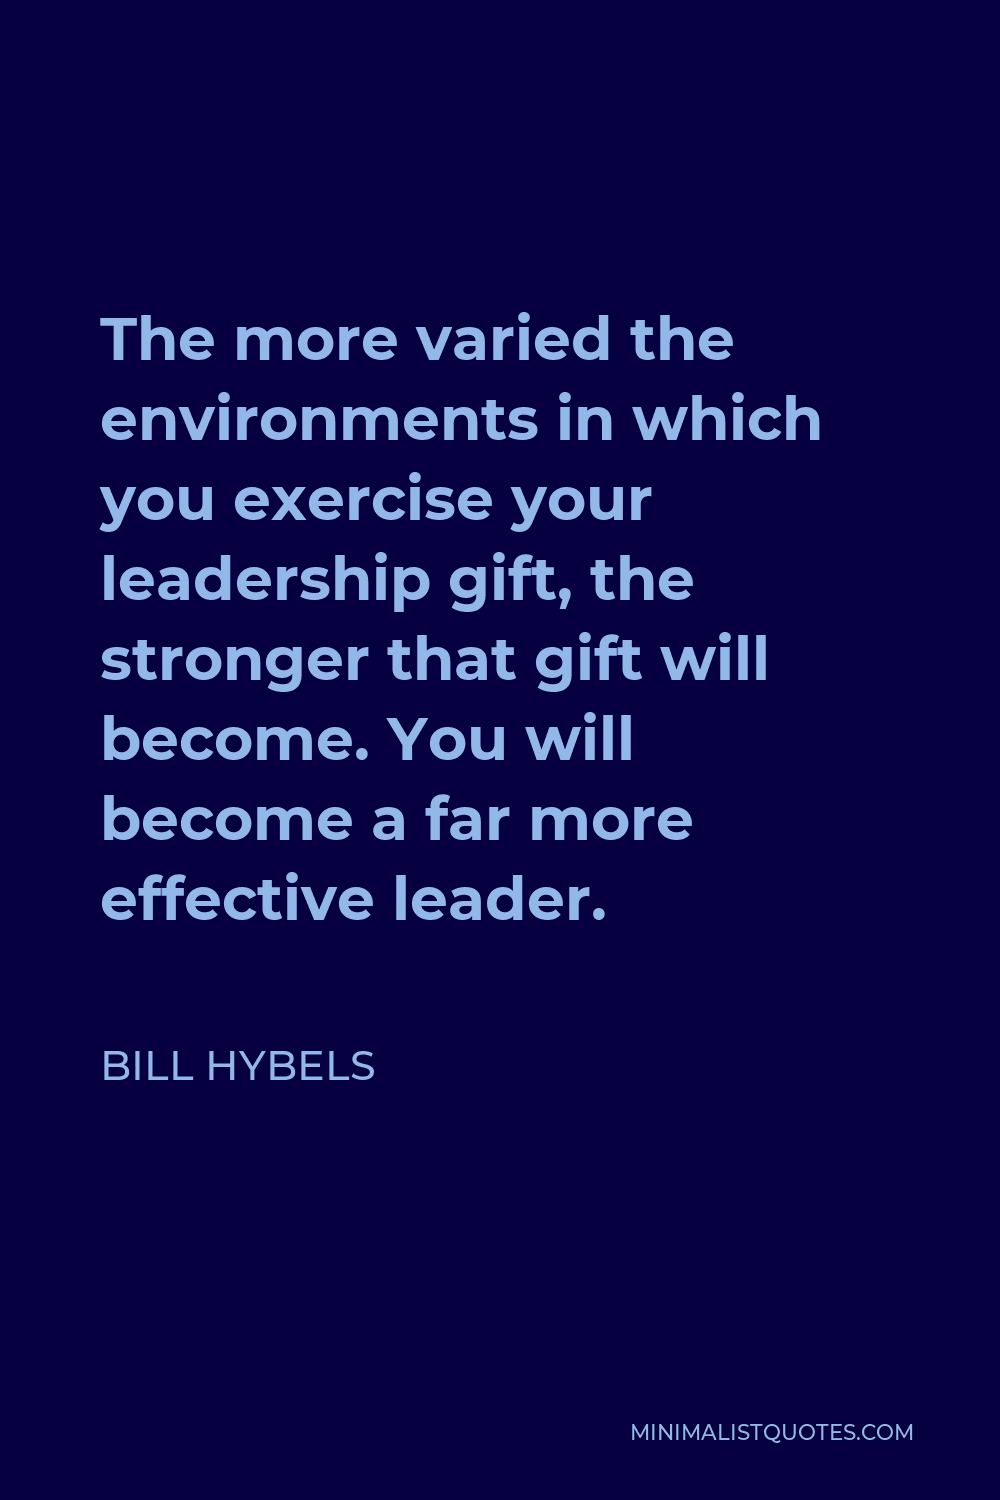 Bill Hybels Quote - The more varied the environments in which you exercise your leadership gift, the stronger that gift will become. You will become a far more effective leader.